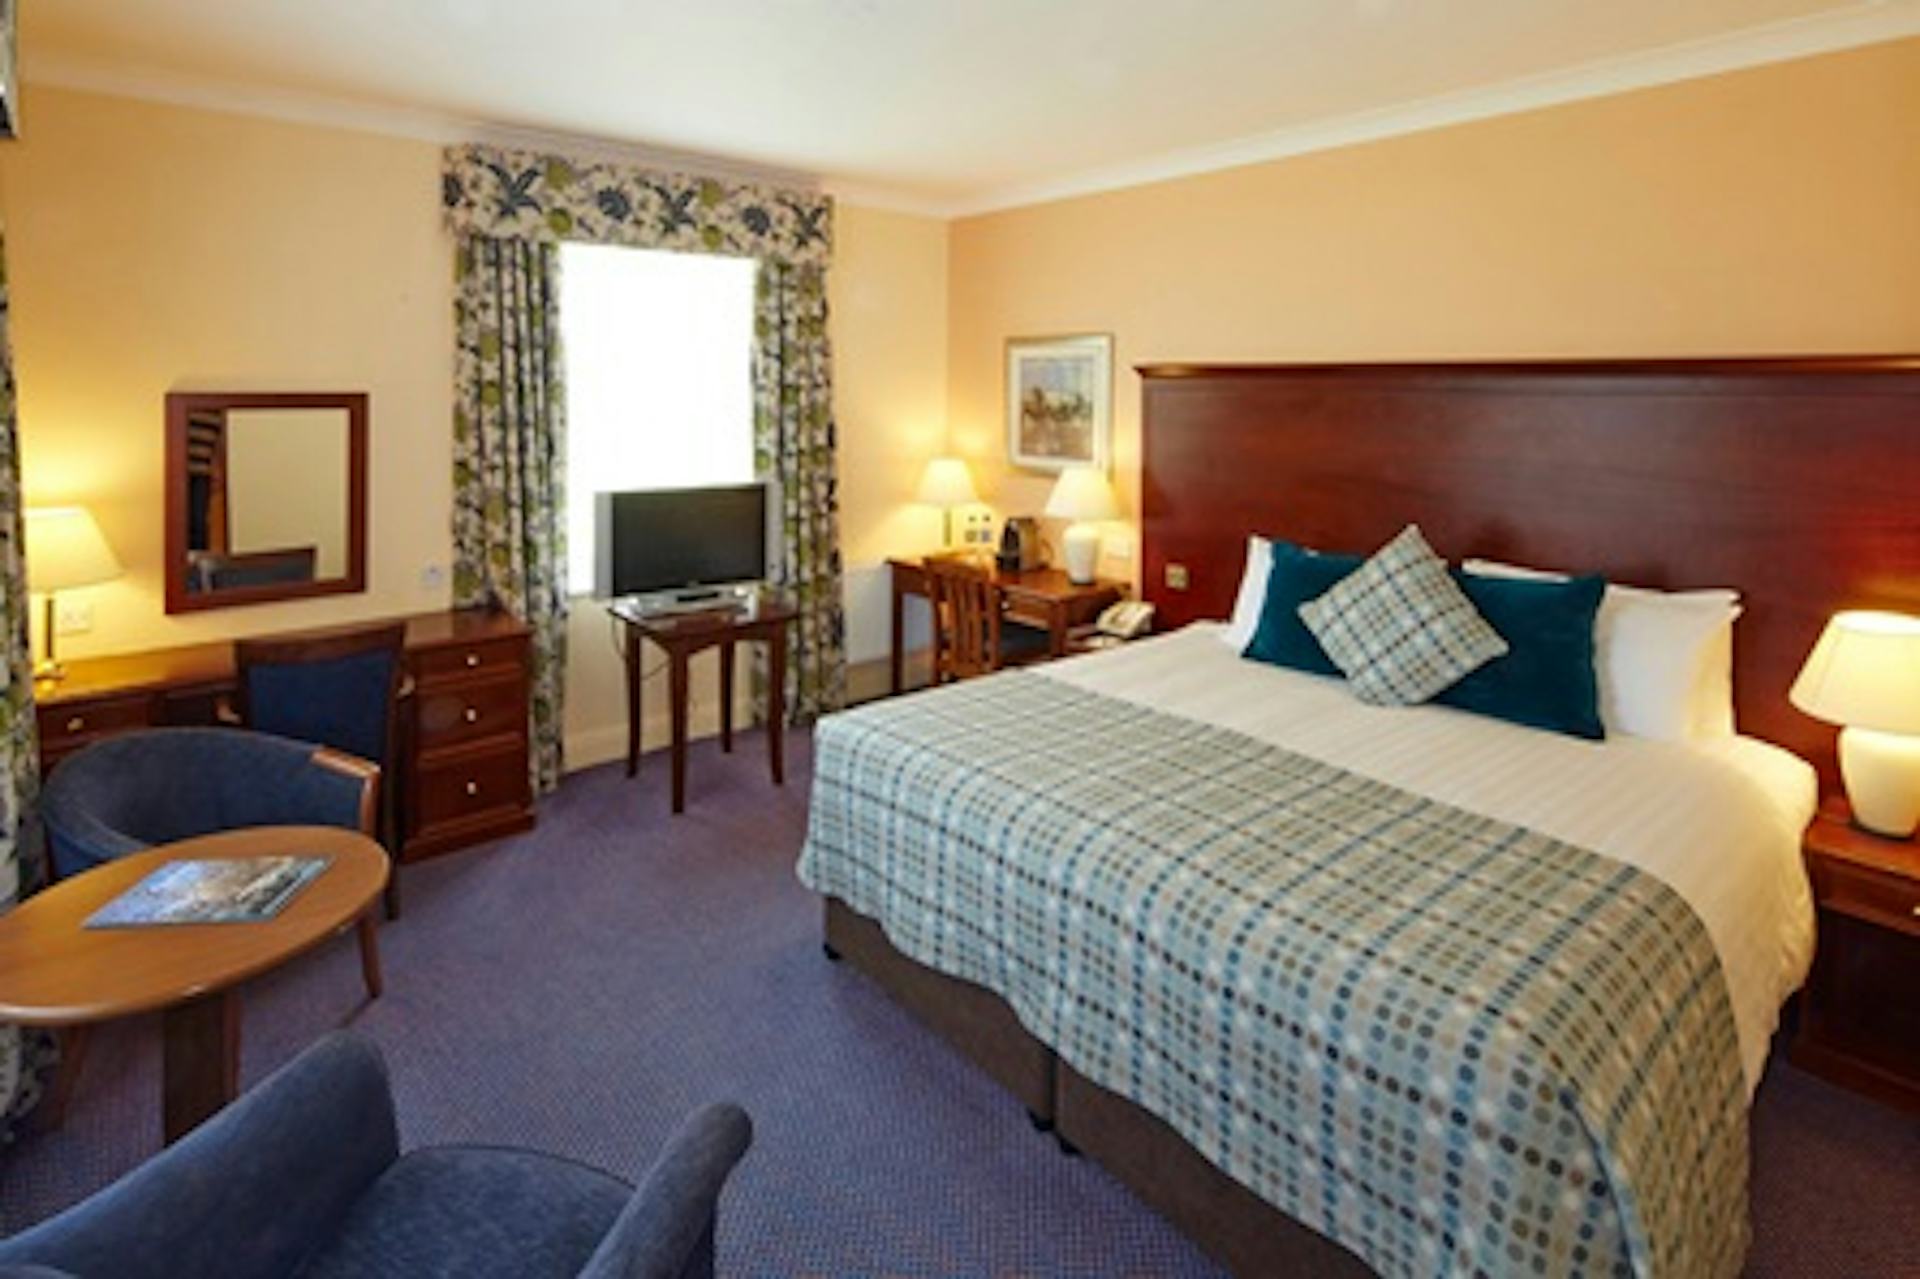 One Night Break with Dinner for Two at the Mercure Newbury Elcot Park Hotel